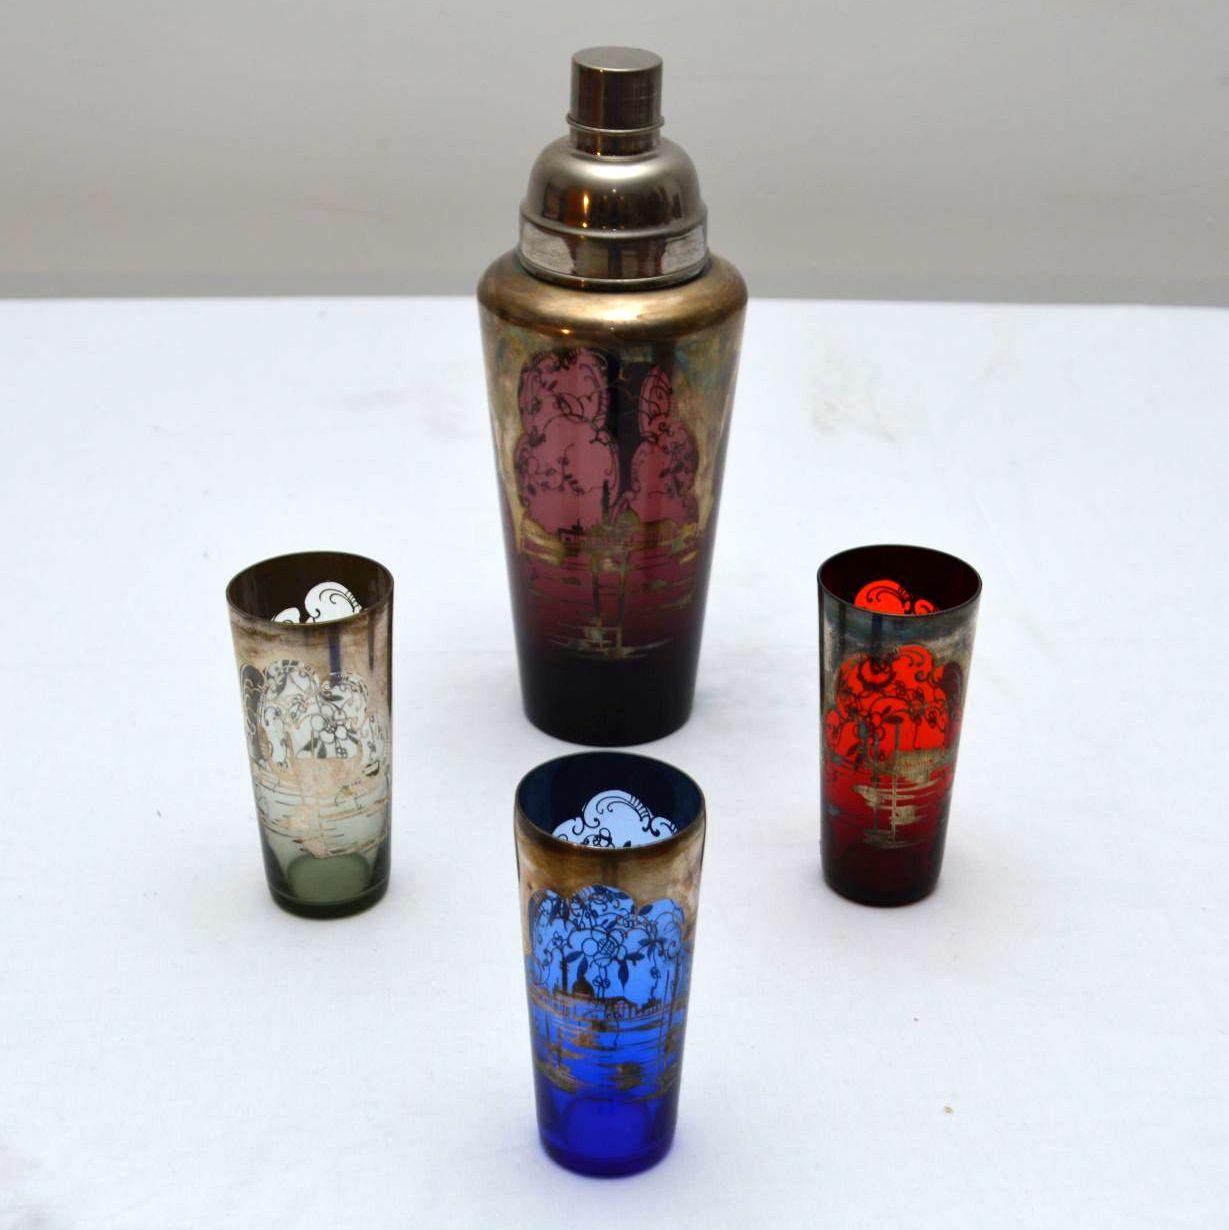 A quite stunning original Art Deco cocktail shaker and three matching glasses, these date from the 1920s-1930s. They are beautifully made from different colored glass, the condition is excellent for its age. The glass is decorated with stunning